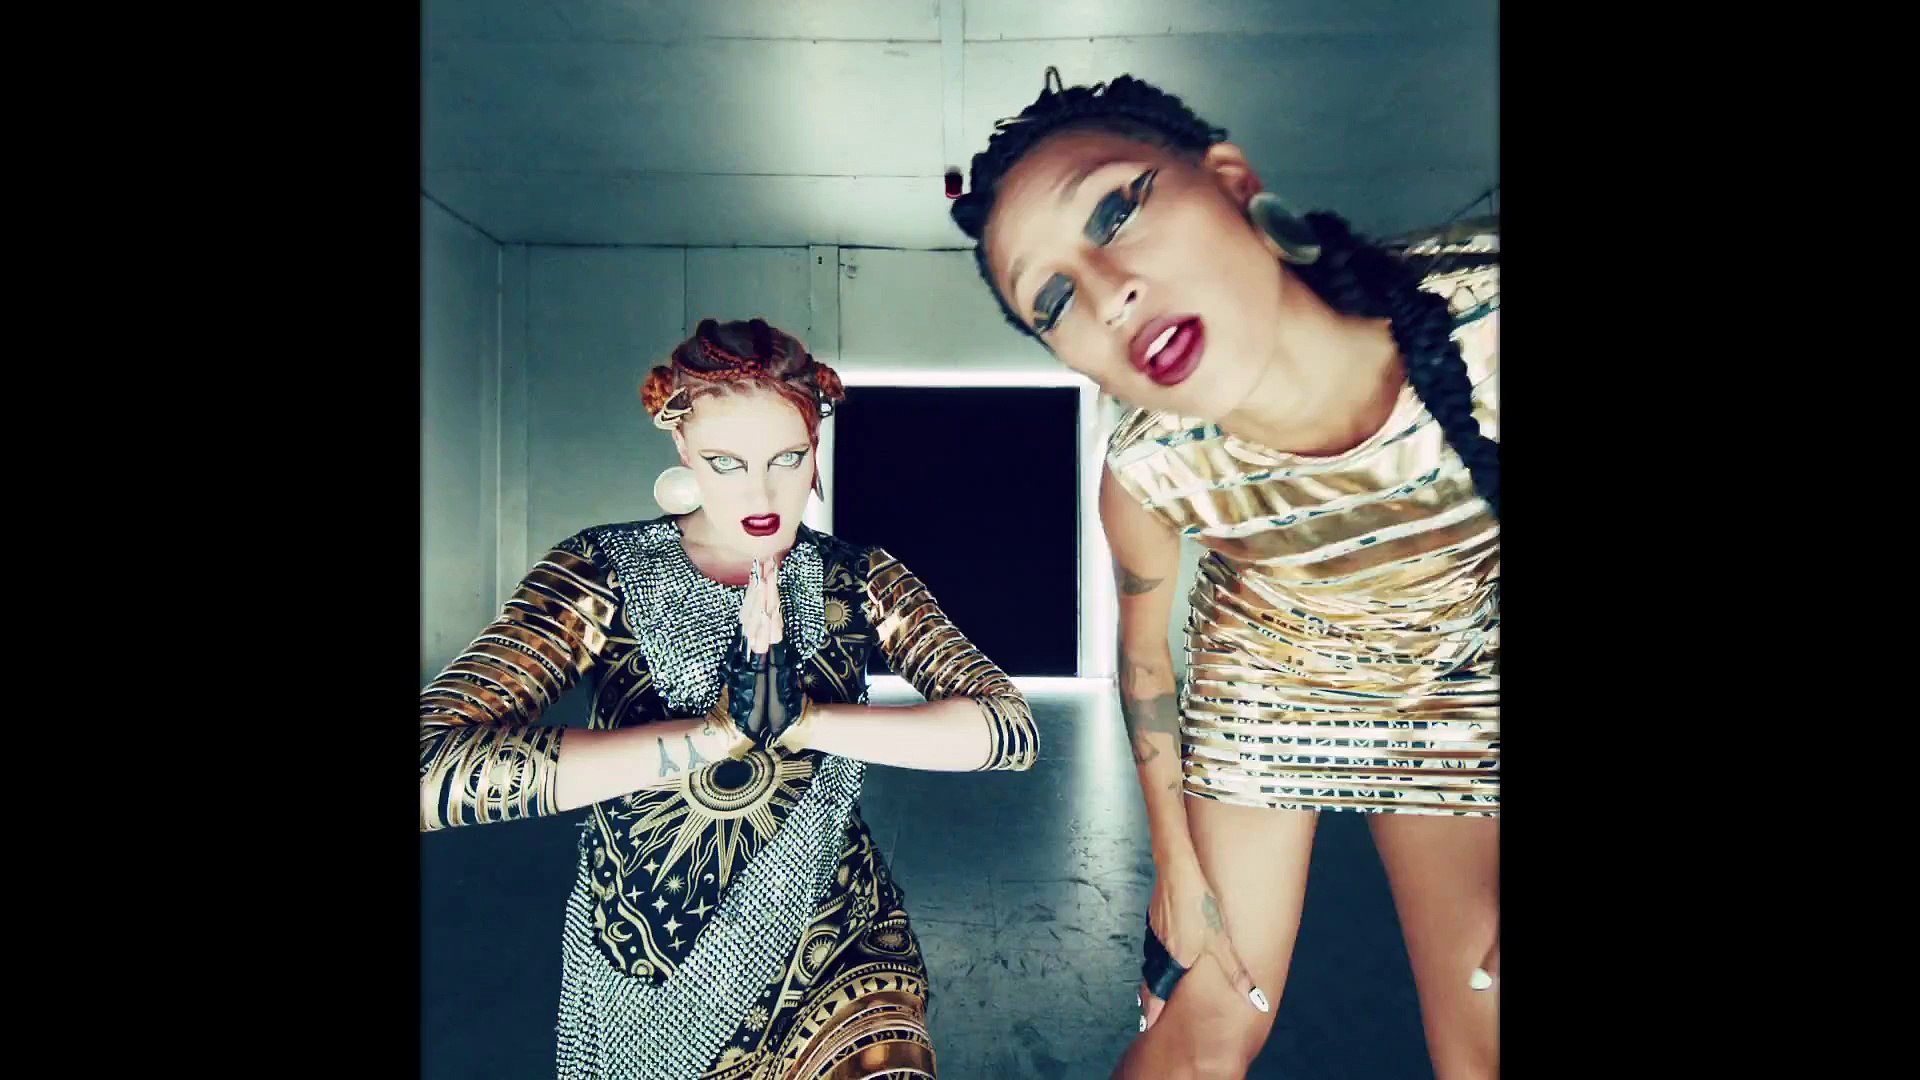 Icona Pop - Emergency (Official Video) - video Dailymotion